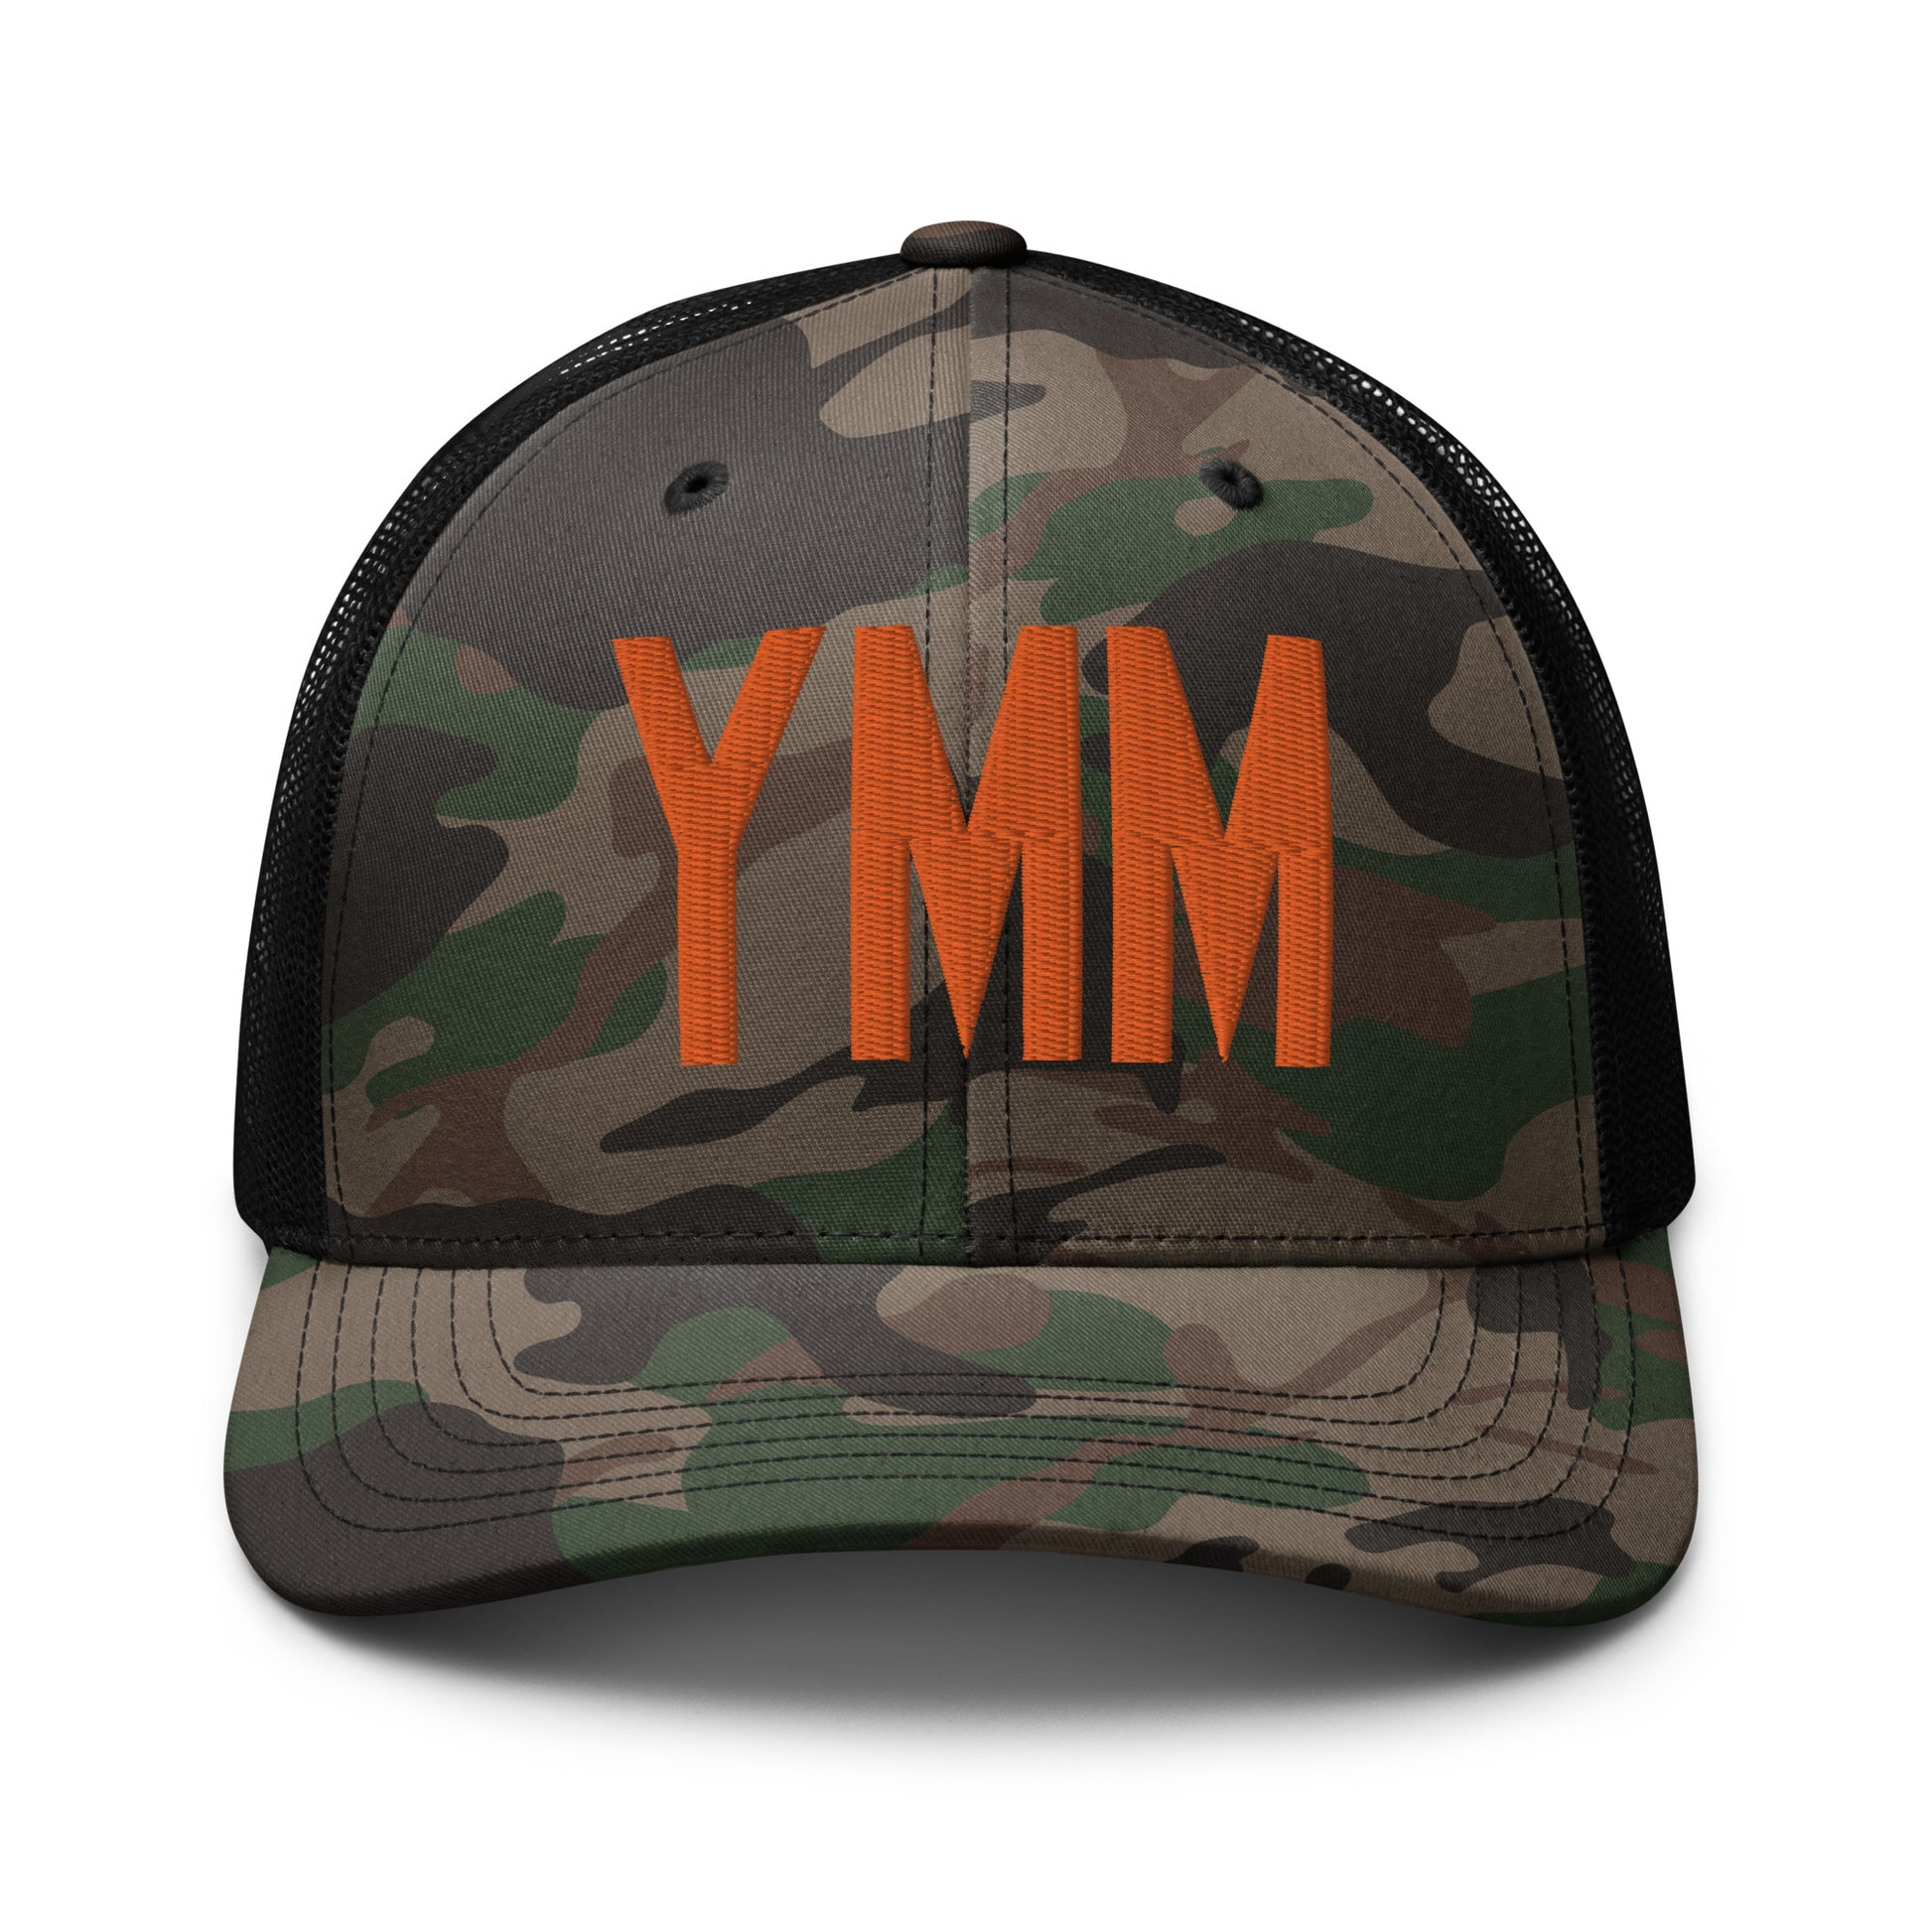 Airport Code Camouflage Trucker Hat - Orange • YMM Fort McMurray • YHM Designs - Image 10